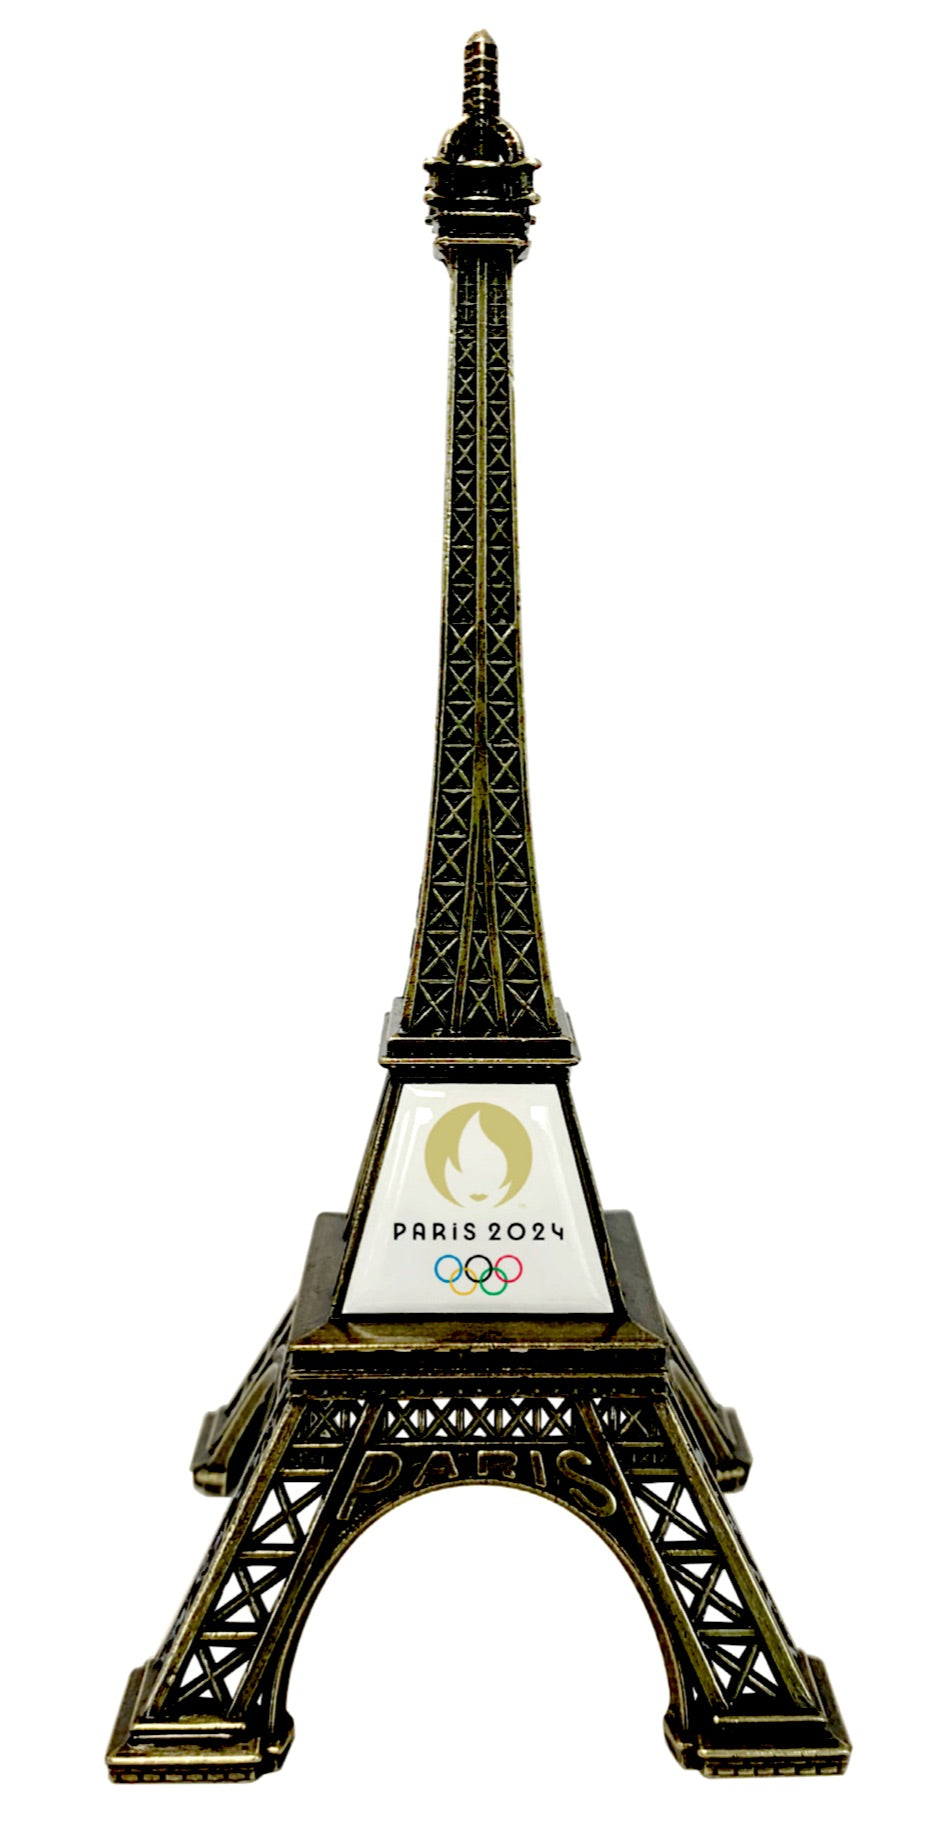 Eiffel Tower Paris 2024 Made in France